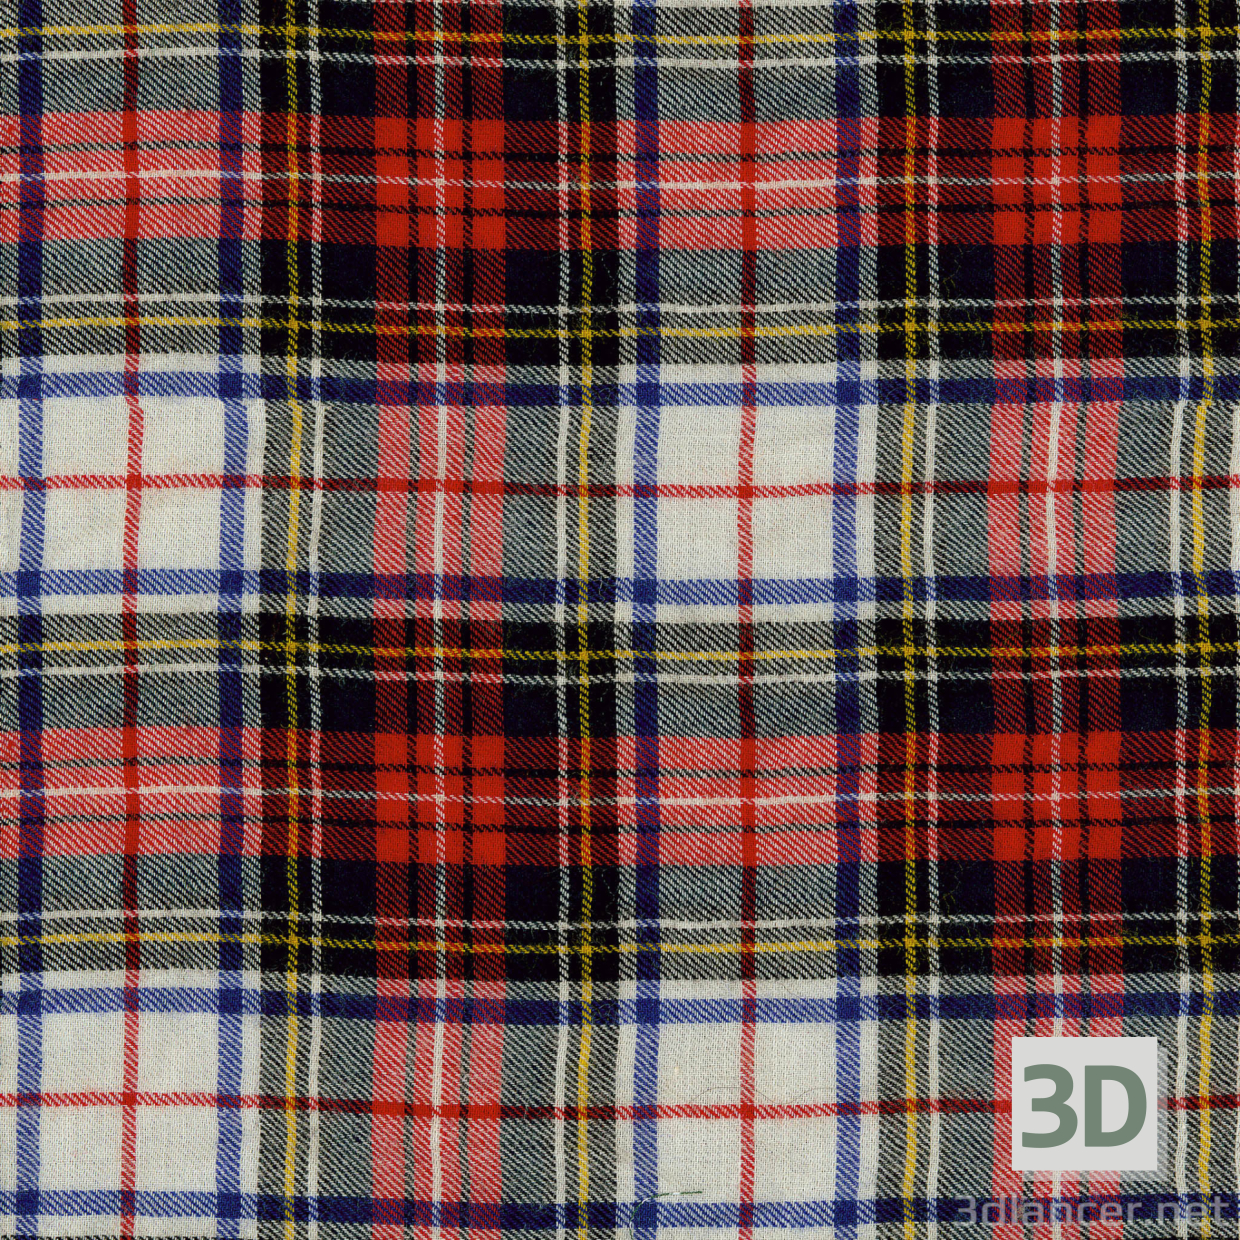 Texture plaid 20 free download - image